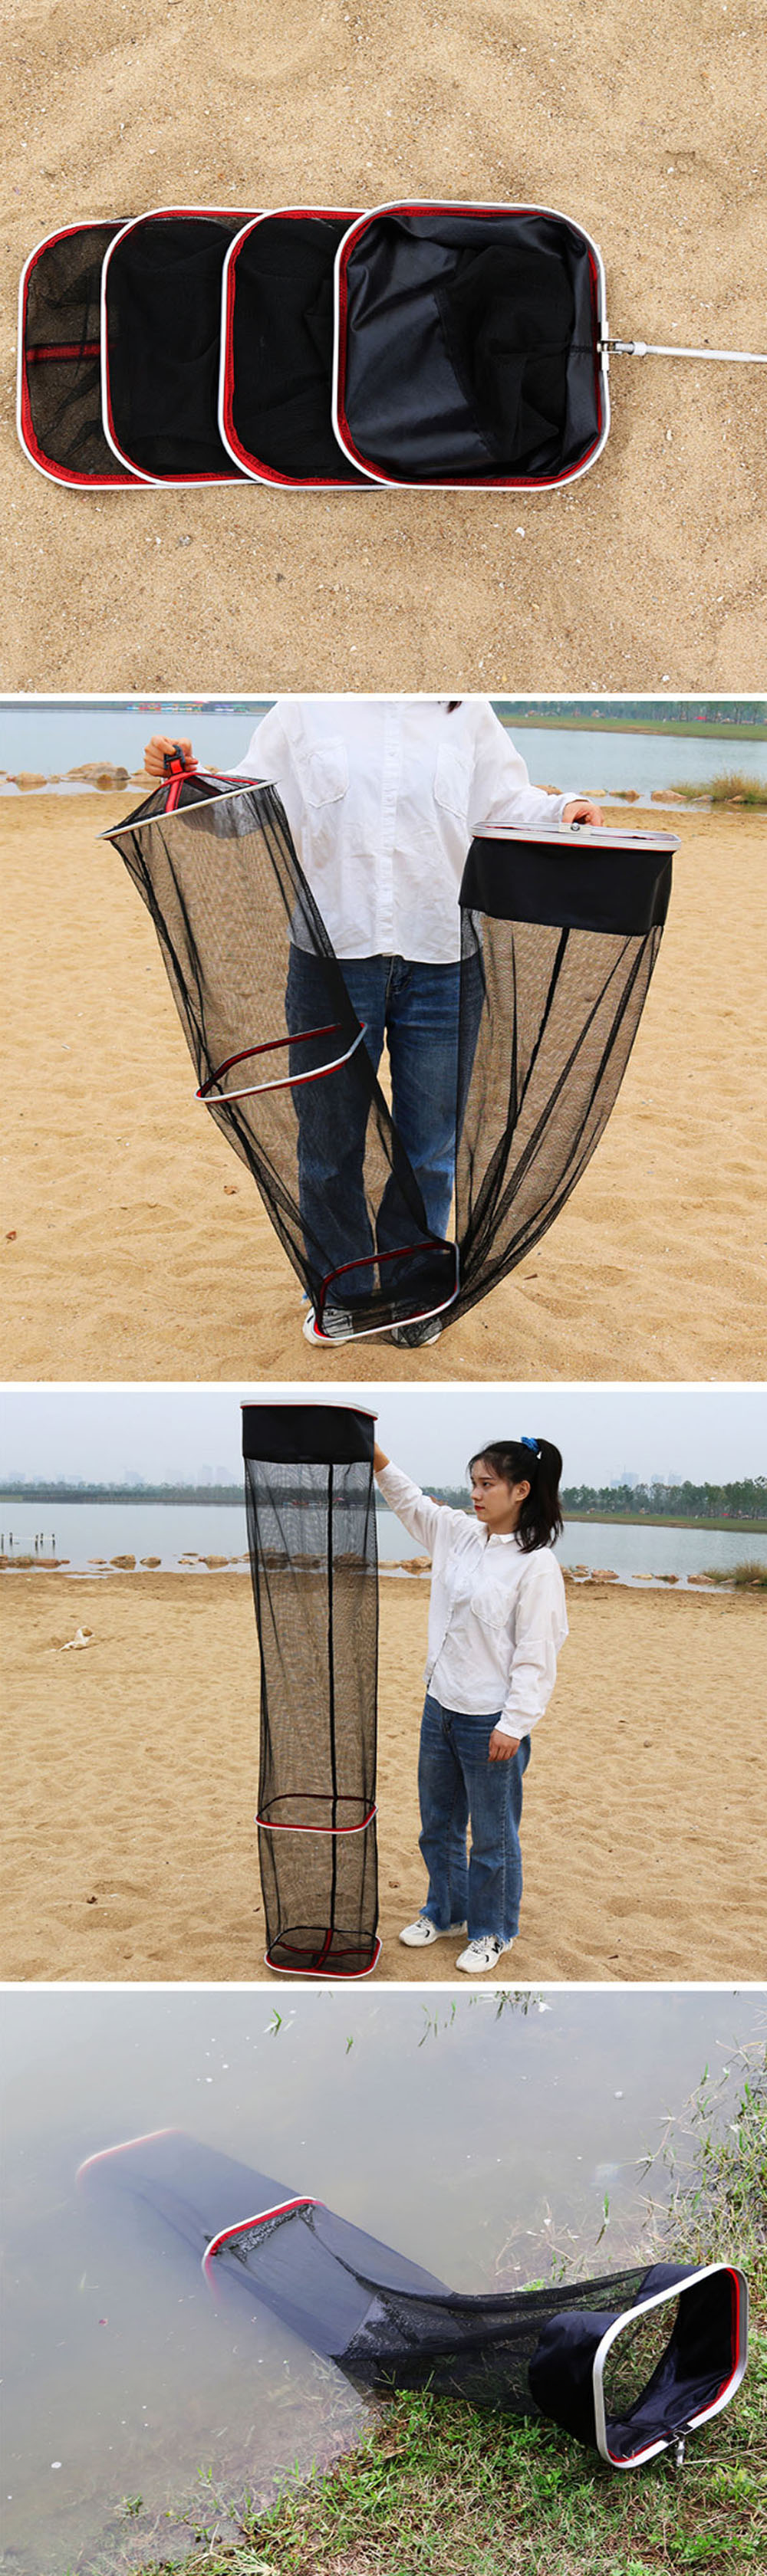 ZANLURE-15M-3127CM-Fish-Cage-Foldable-Glued-Square-Net-Cage-Outdoor-Portable-Fishing-Net-Cage-Fish-B-1853253-3